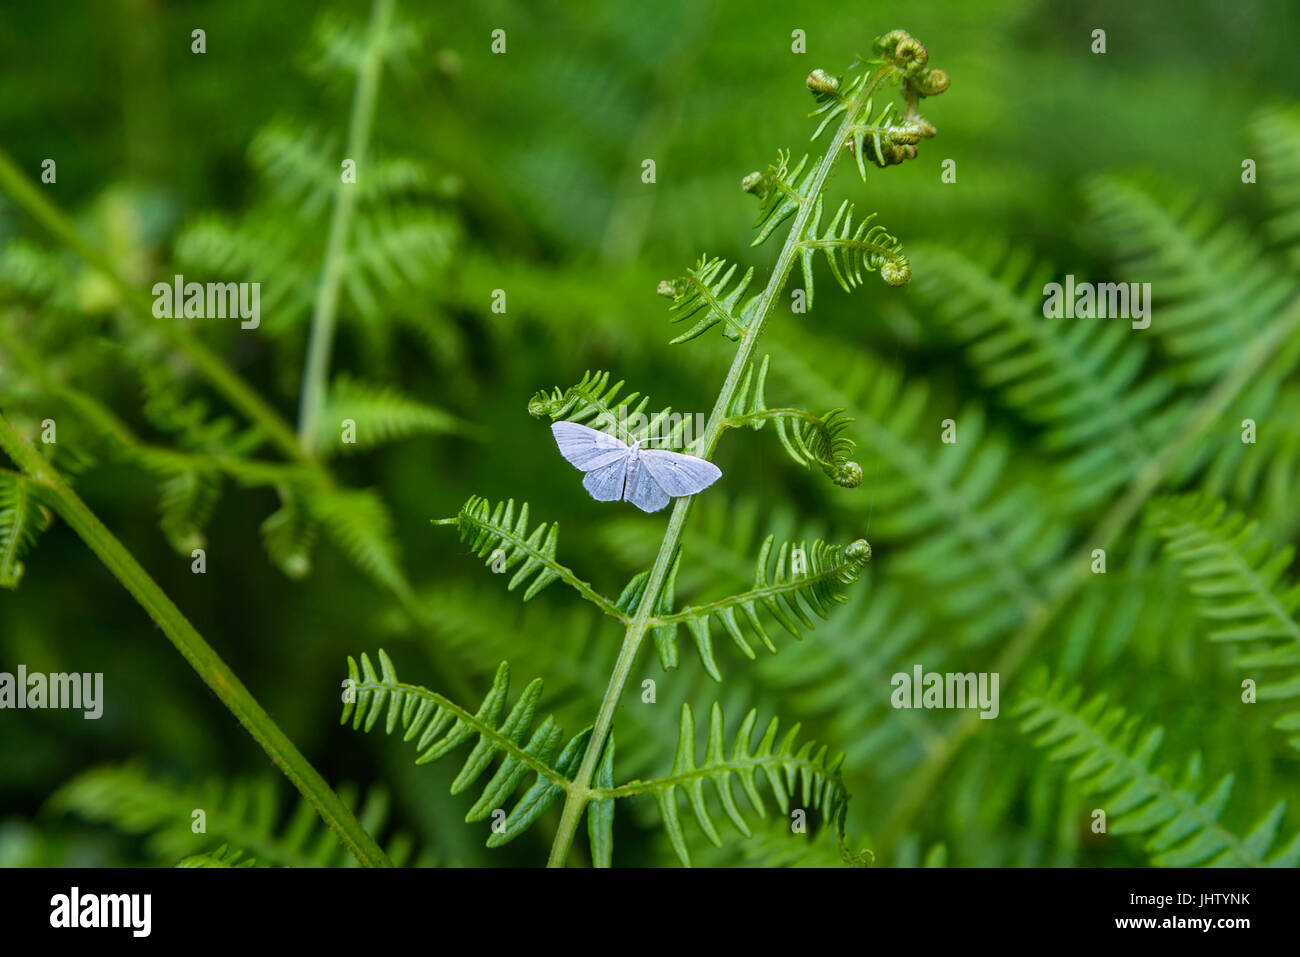 White butterfly sitting on a fern leaf Stock Photo